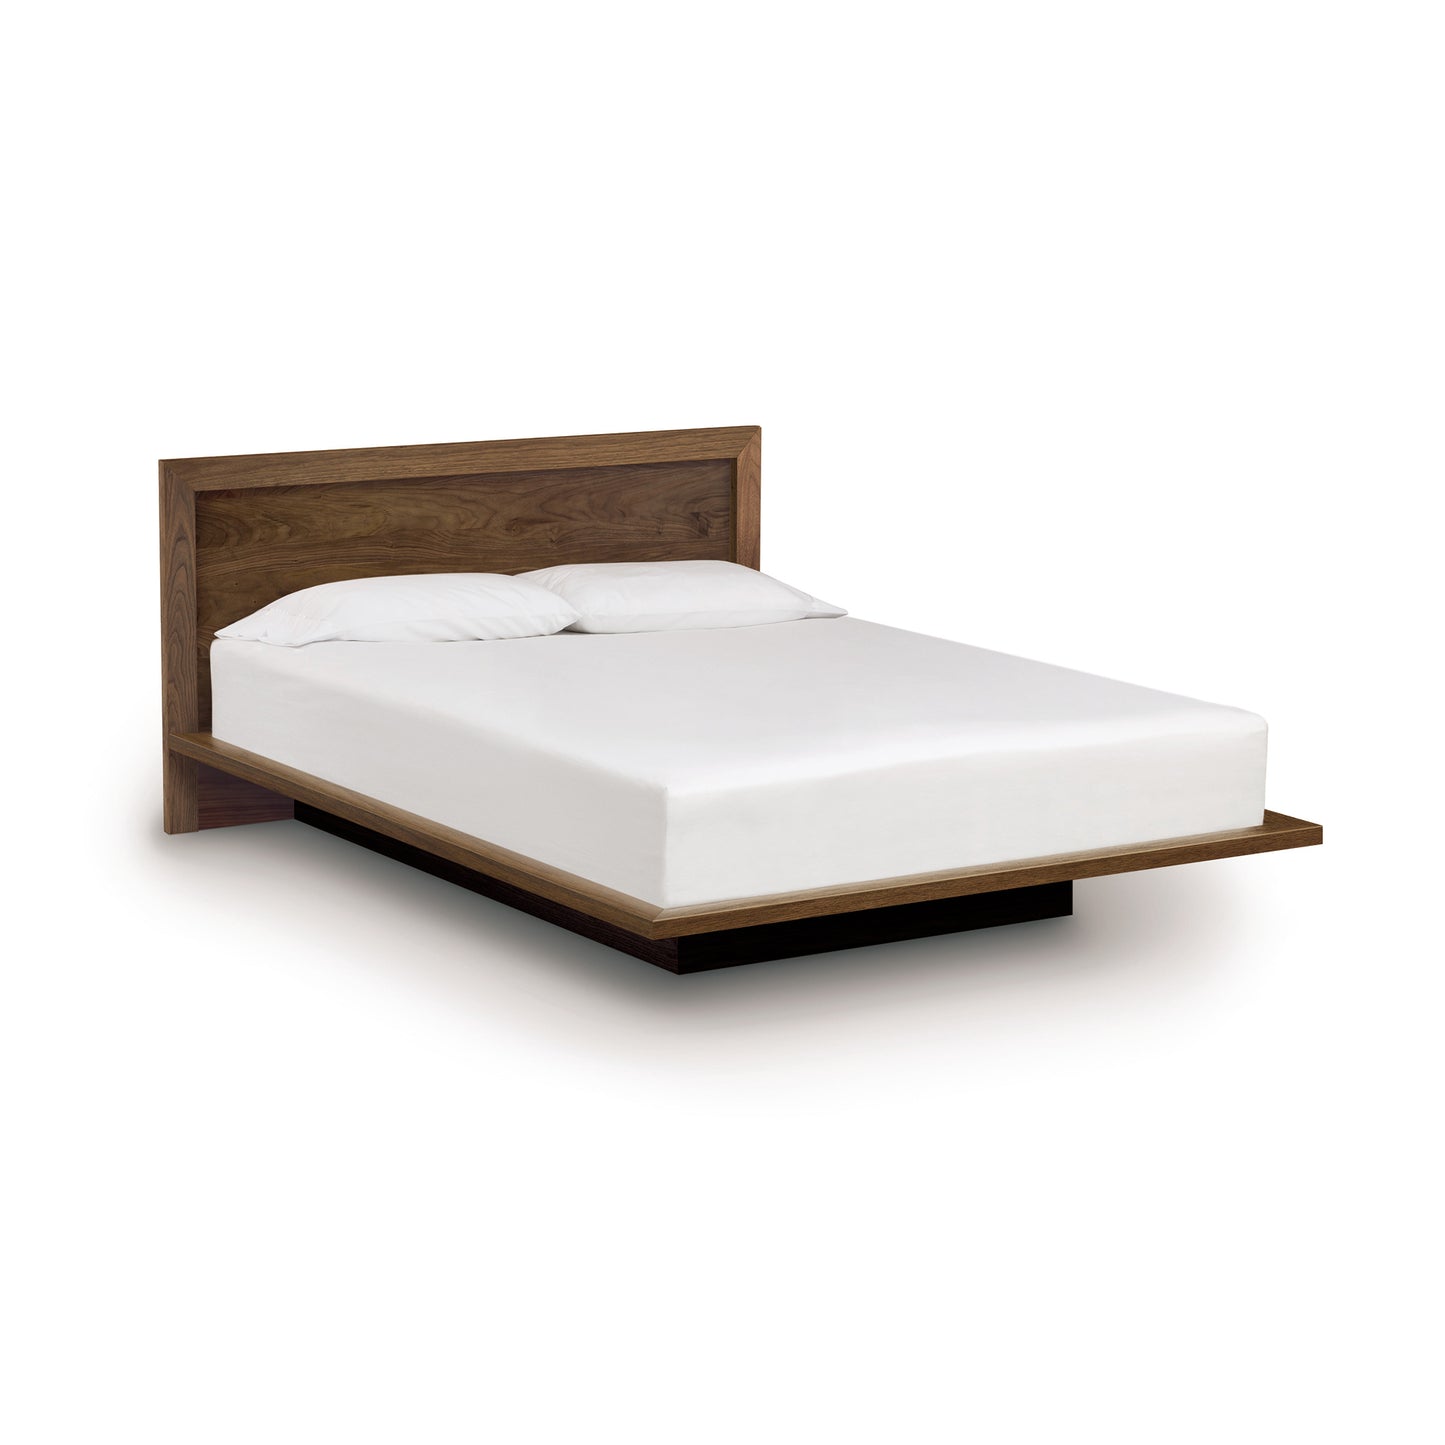 The Moduluxe Platform Bed with Panel Headboard - 35" Series from Copeland Furniture features a wooden headboard and footboard, making it a stylish and durable addition to your bedroom furniture.